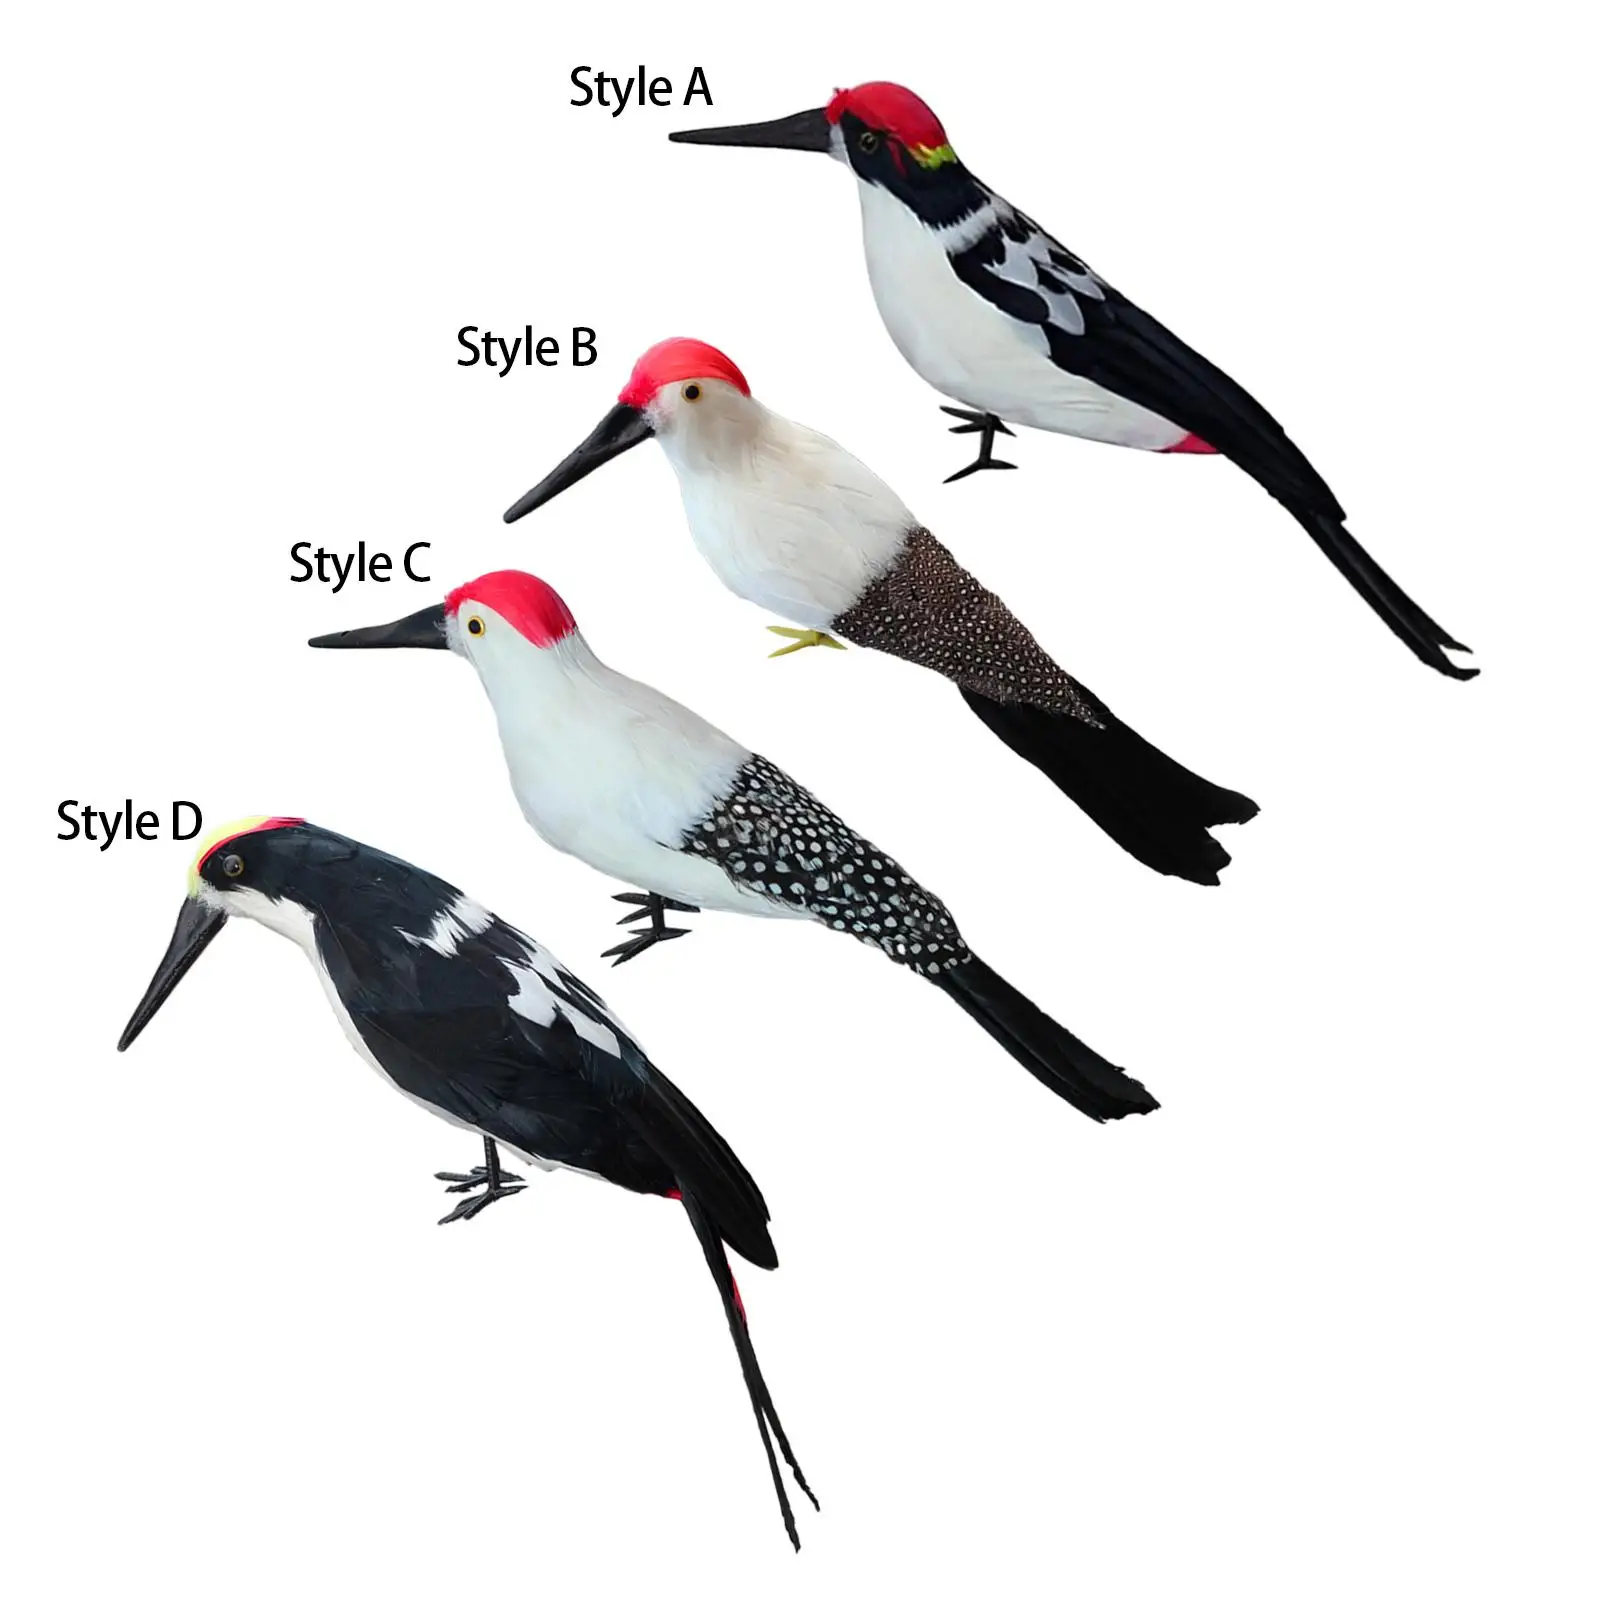 Simulation Woodpecker Handcrafted Faux Cute Scene Model Toys Artificial Feather Weatherproof Art Gift Statue Ornament Decorative